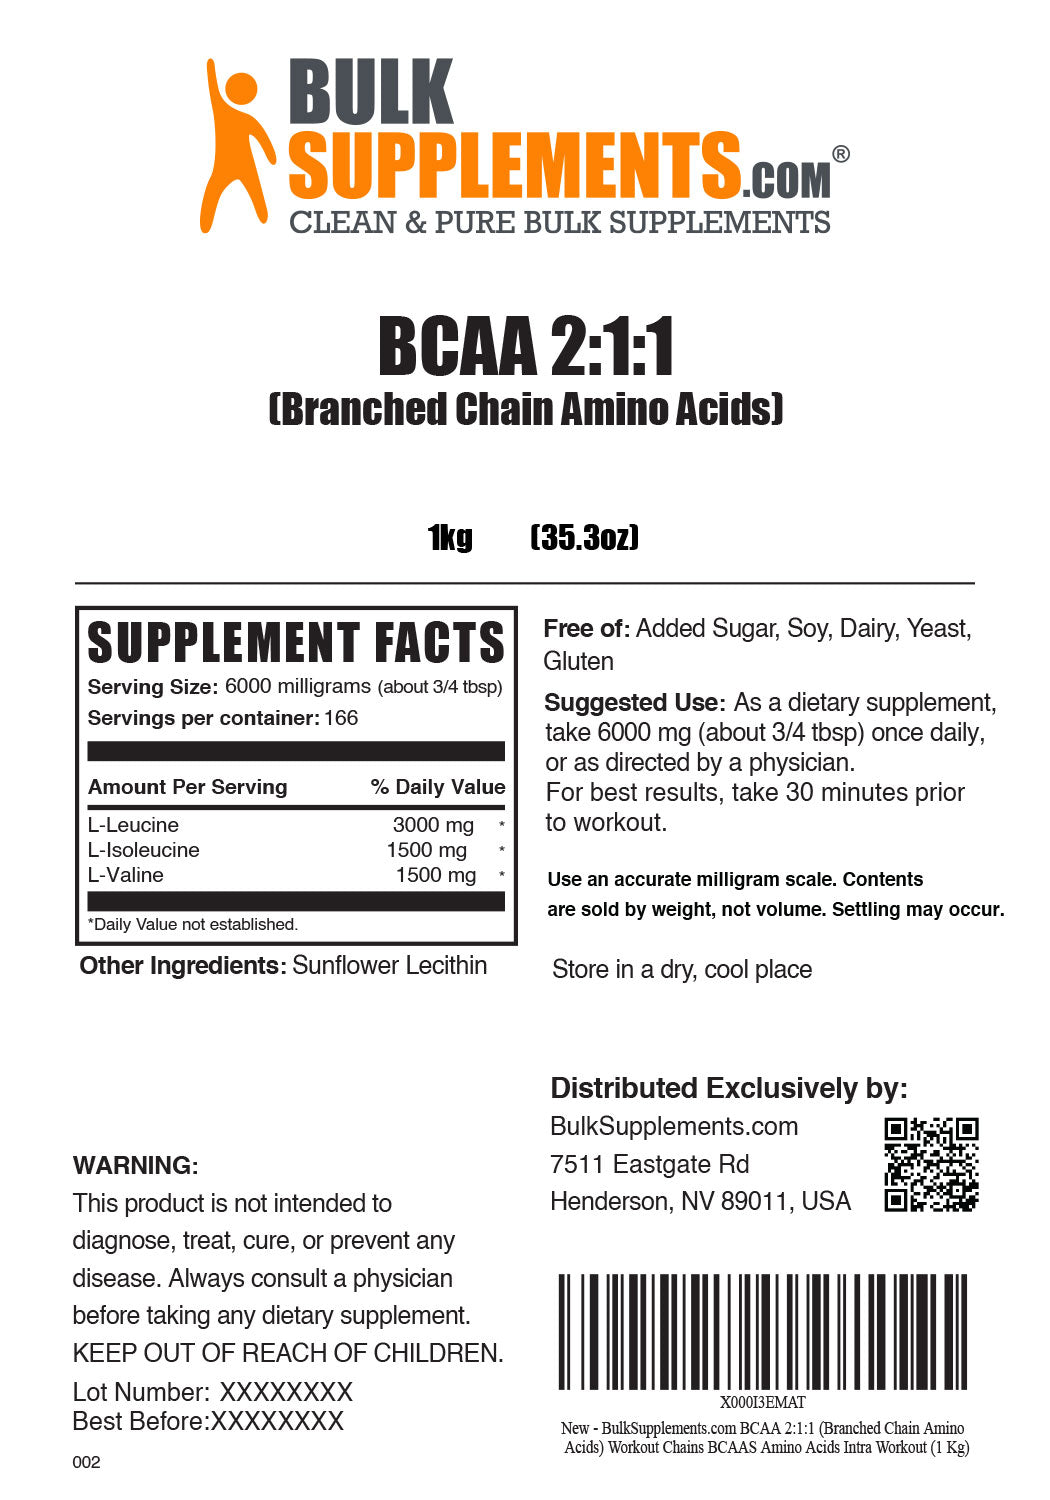 BCAA Powder Supplement Nutritional Facts and Serving Size for 1kg bag